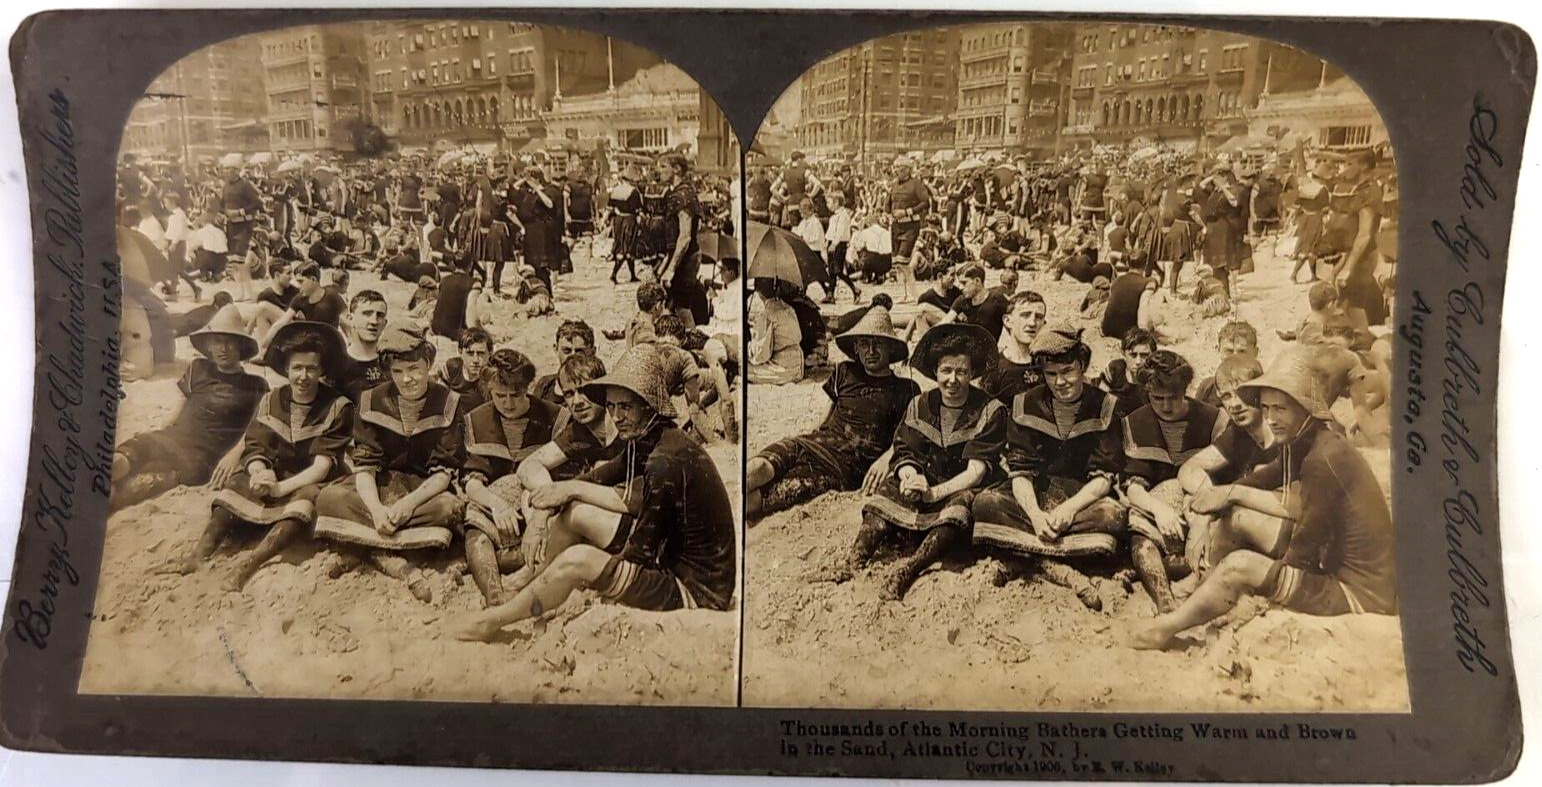 Vintage Stereograph Stereo View Stereoscope Card 1906 Thousands @ Atlantic City